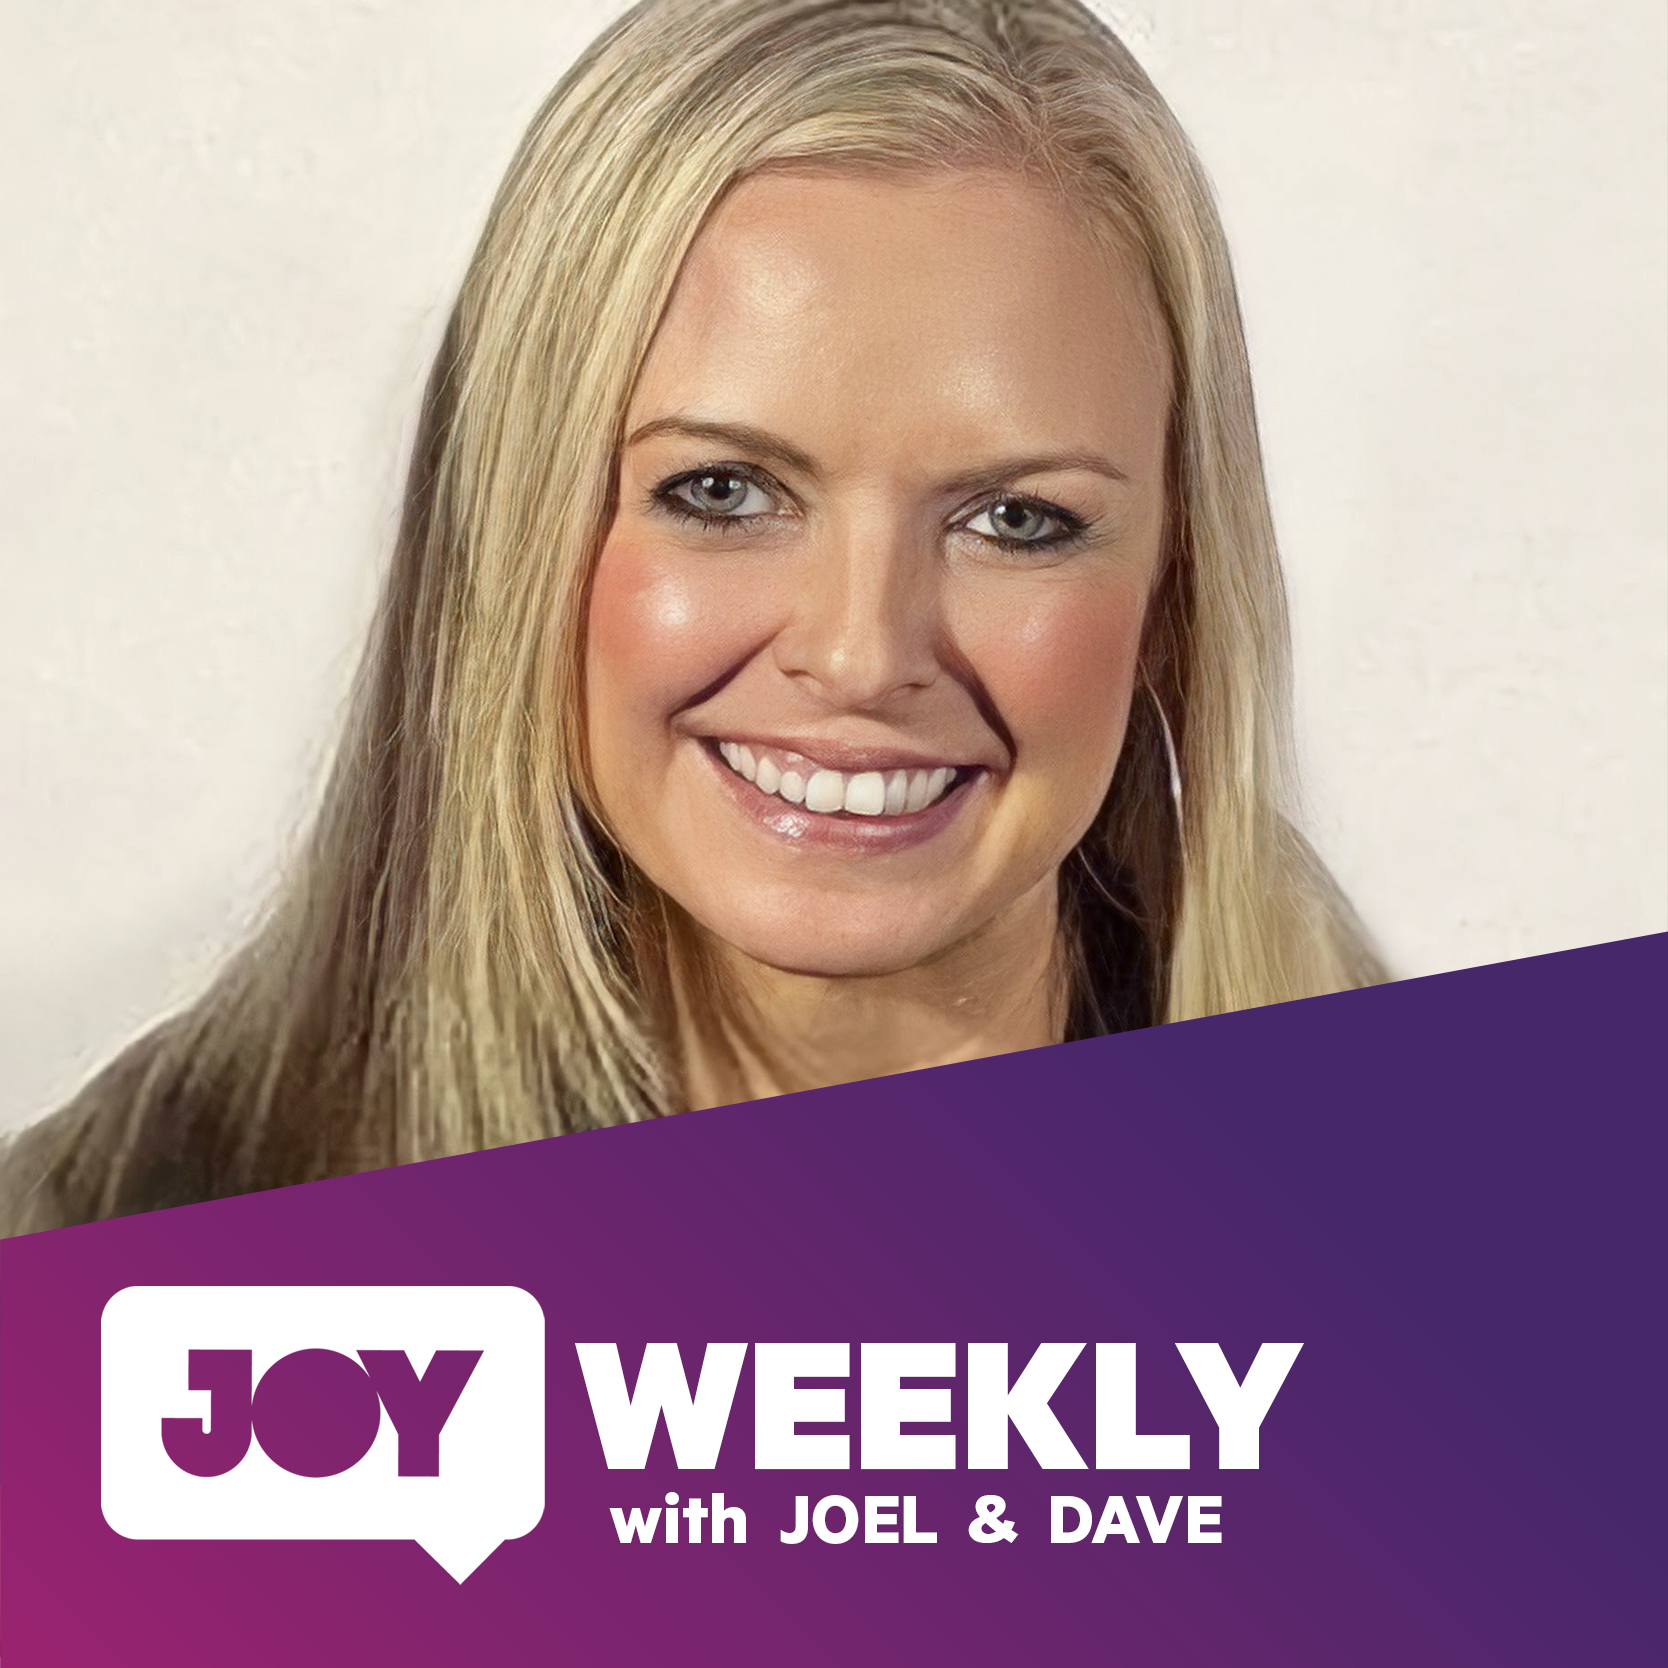 Interview: Anna Murphy from JOY Breakfast… gives Joel and Dave some advice!